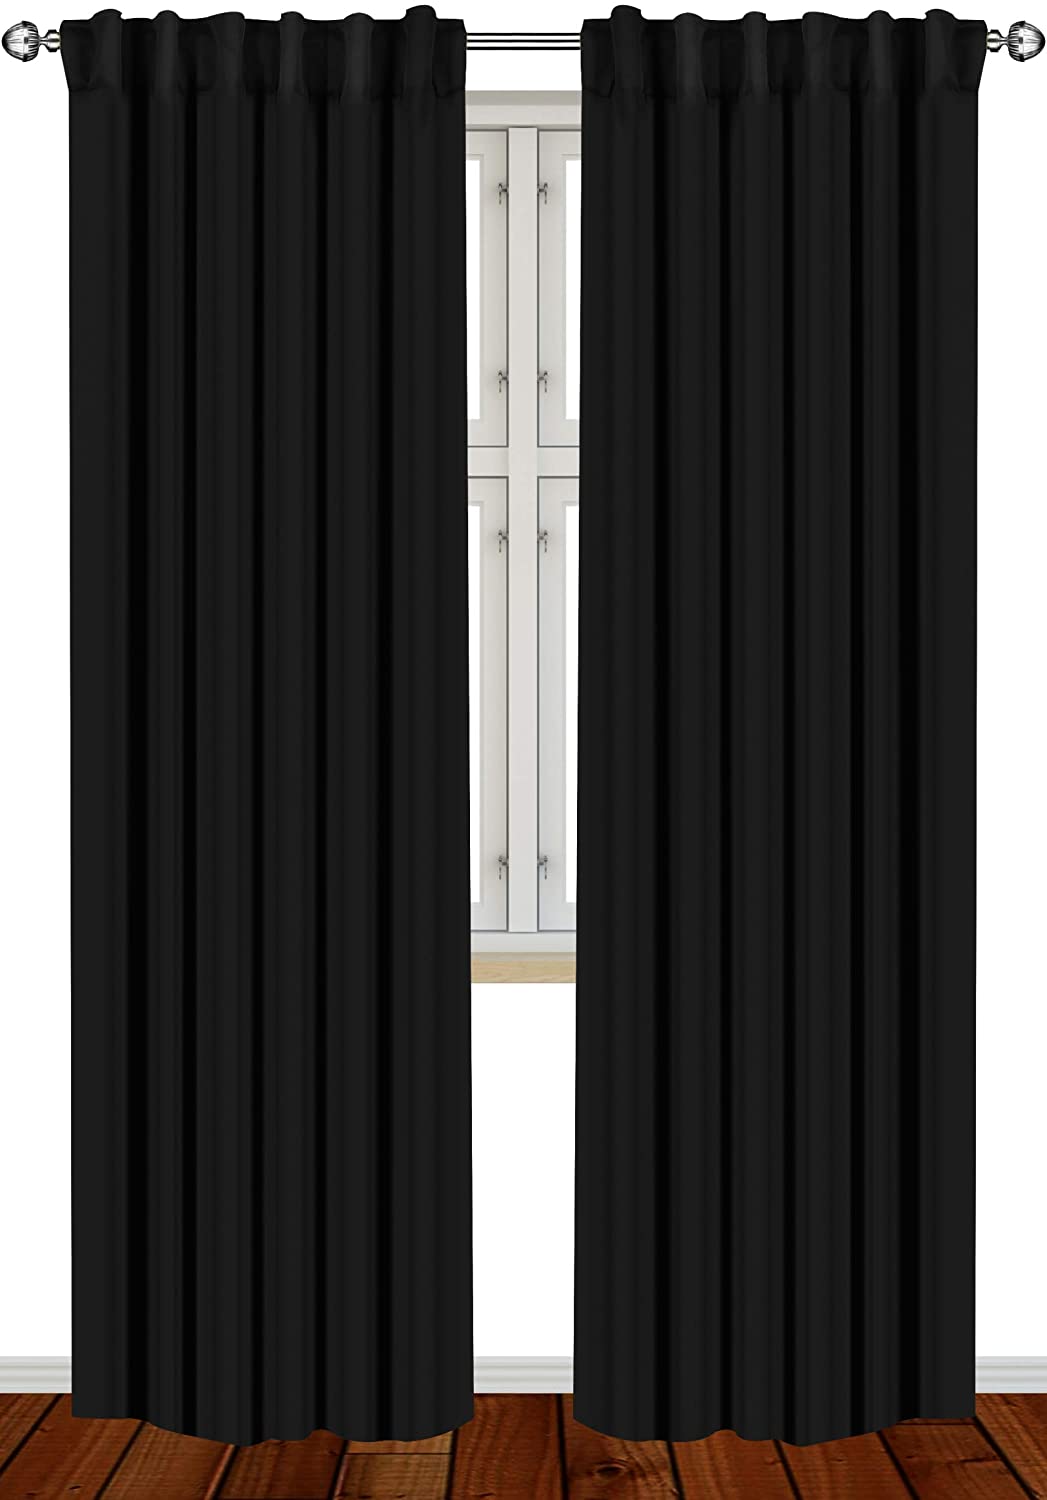 Utopia Thermal Insulated Blackout Curtains, 2-Panels